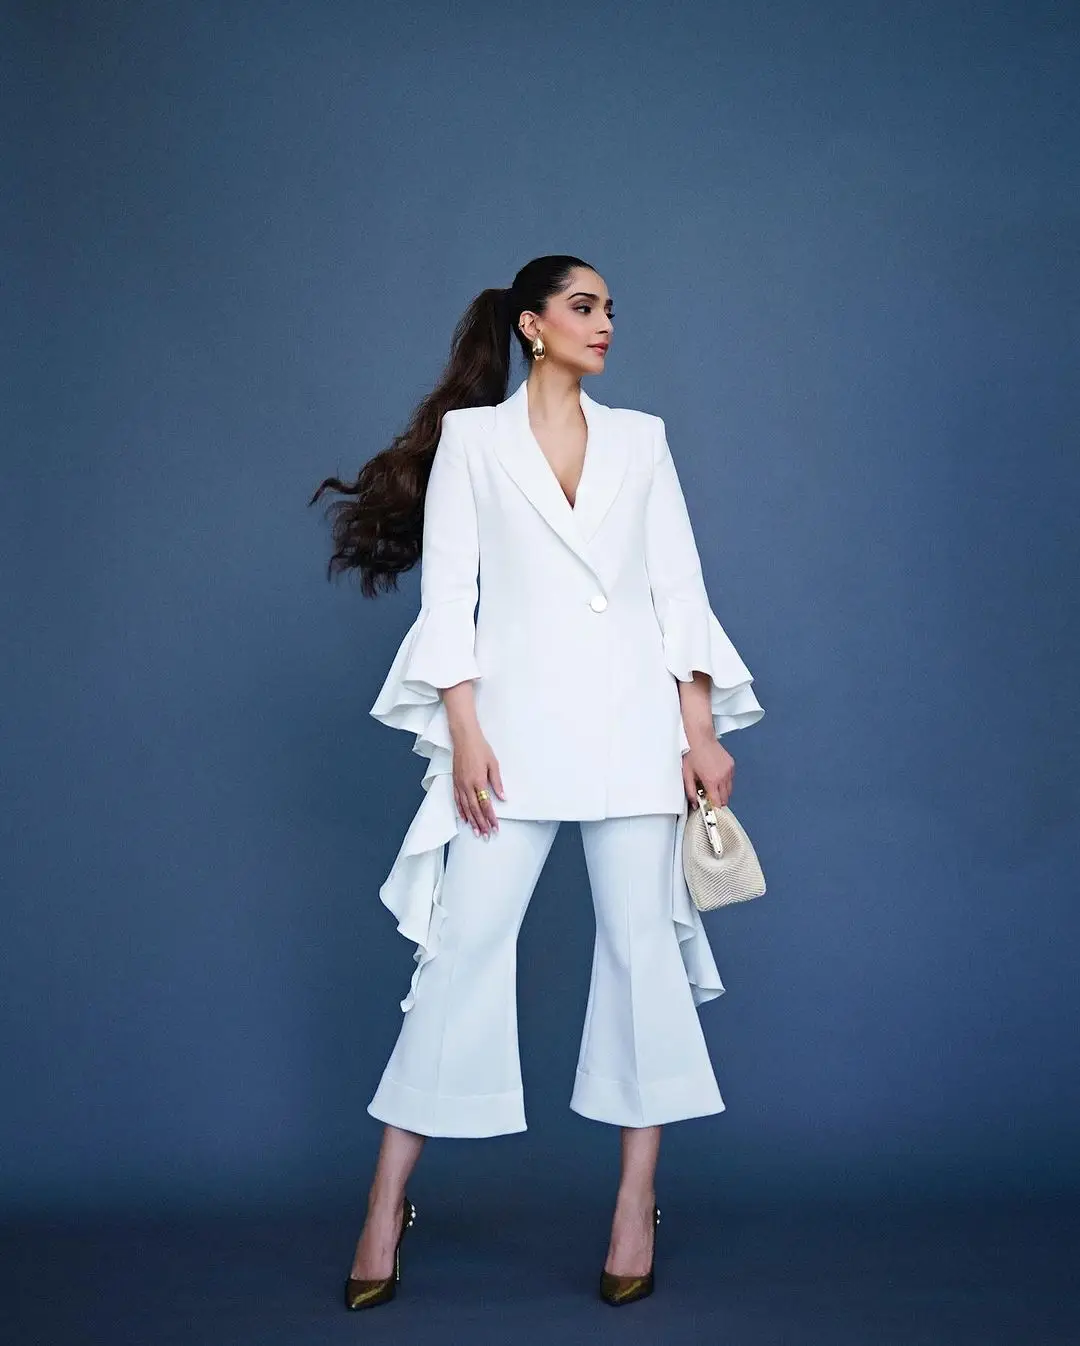 BOLLYWOOD ACTRESS SONAM KAPOOR PHOTOSHOOT IN LONG WHITE TOP PANT 6